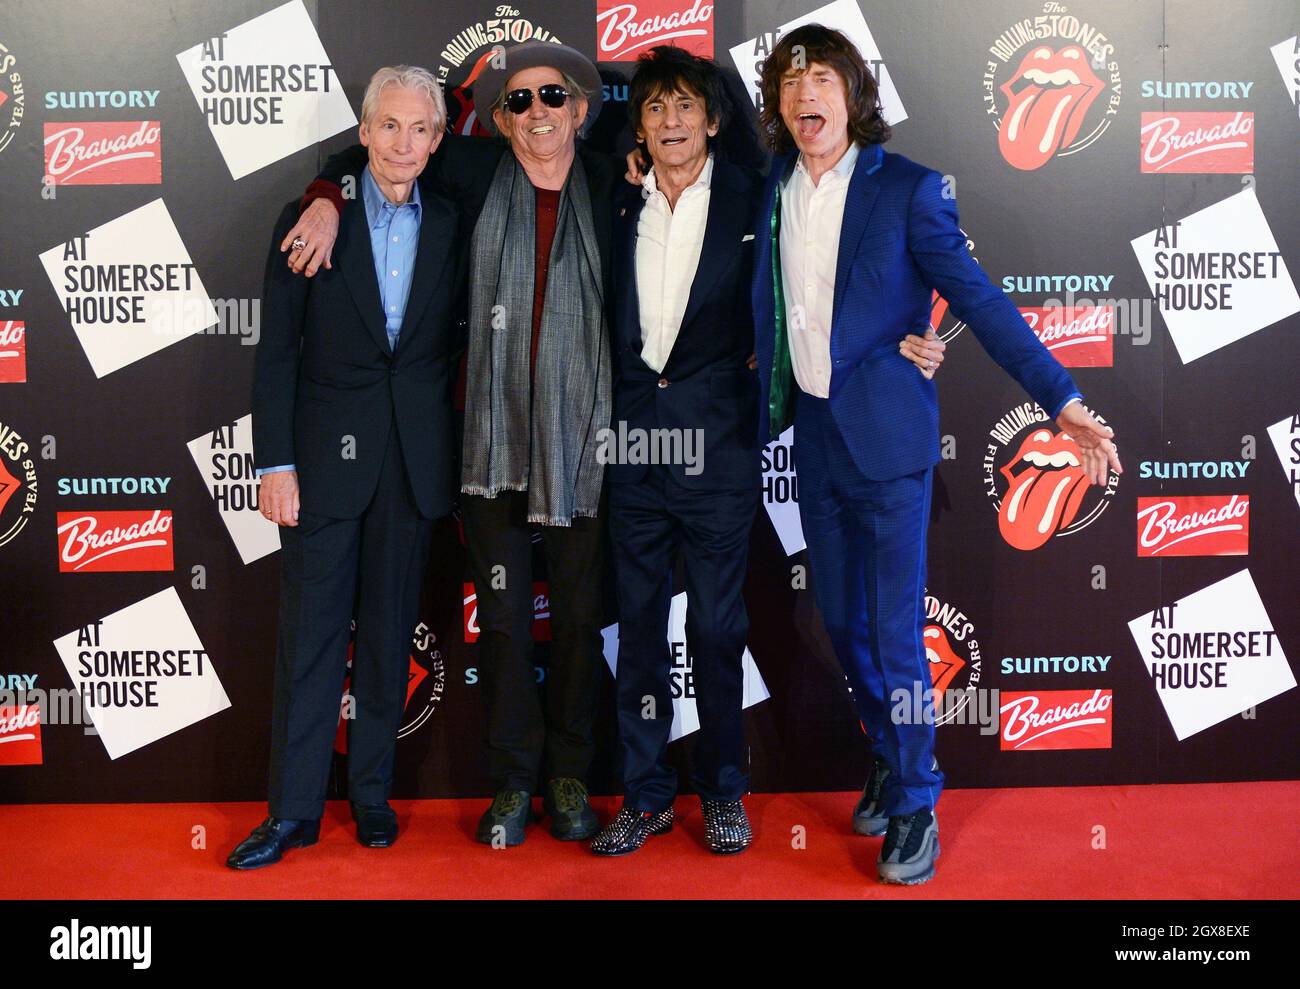 (L-R) Charlie Watts, Keith Richards, Ronnie Wood and Mick Jagger attend an exhibition to celebrate the 50th anniversary of The Rolling Stones at Somerset House on July 12, 2012. Stock Photo